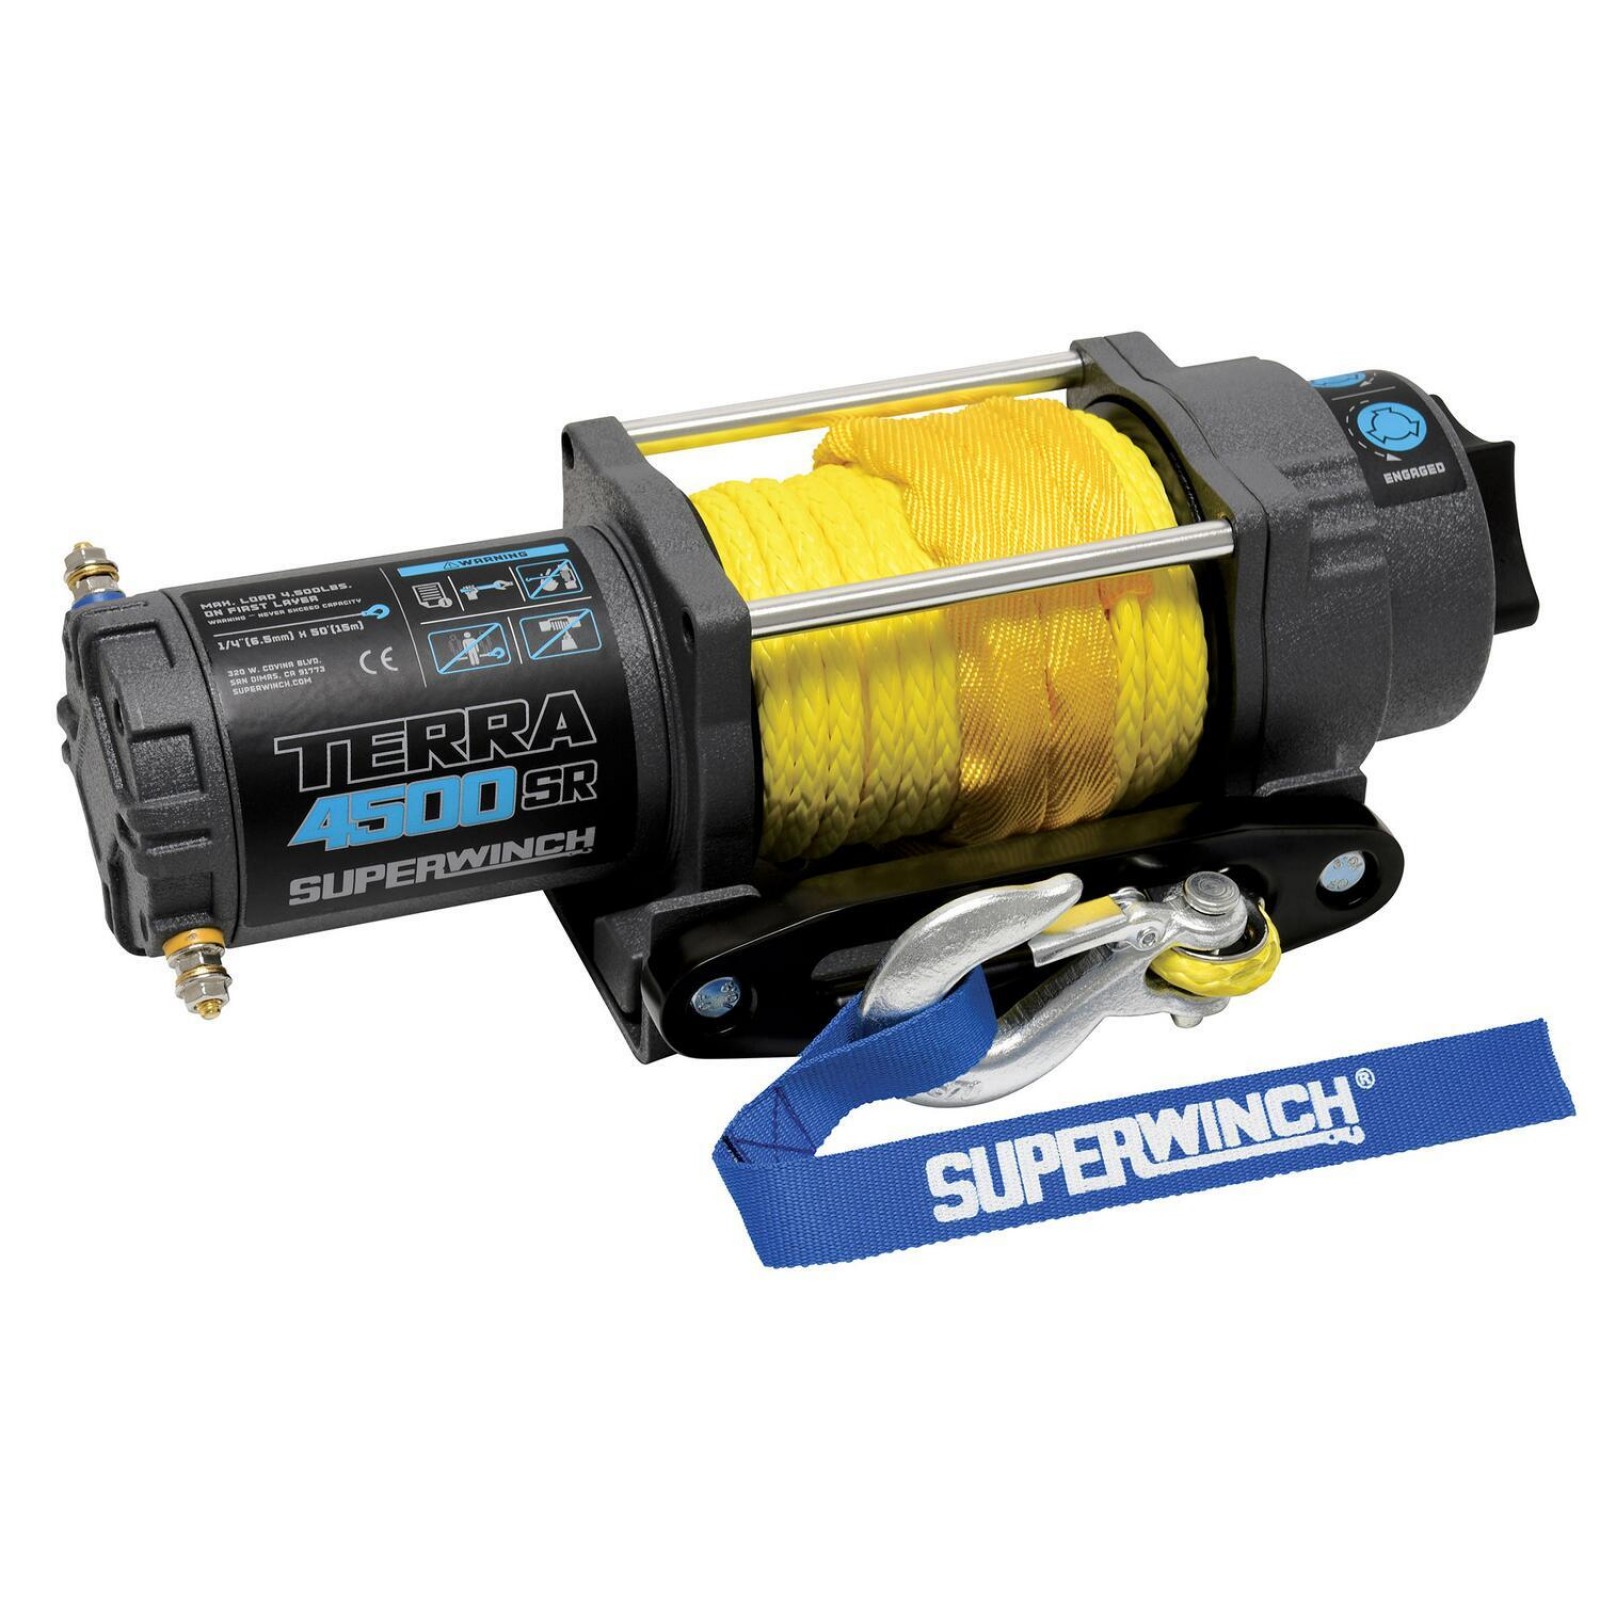 Terra 4500SR Winch with Synthetic Rope